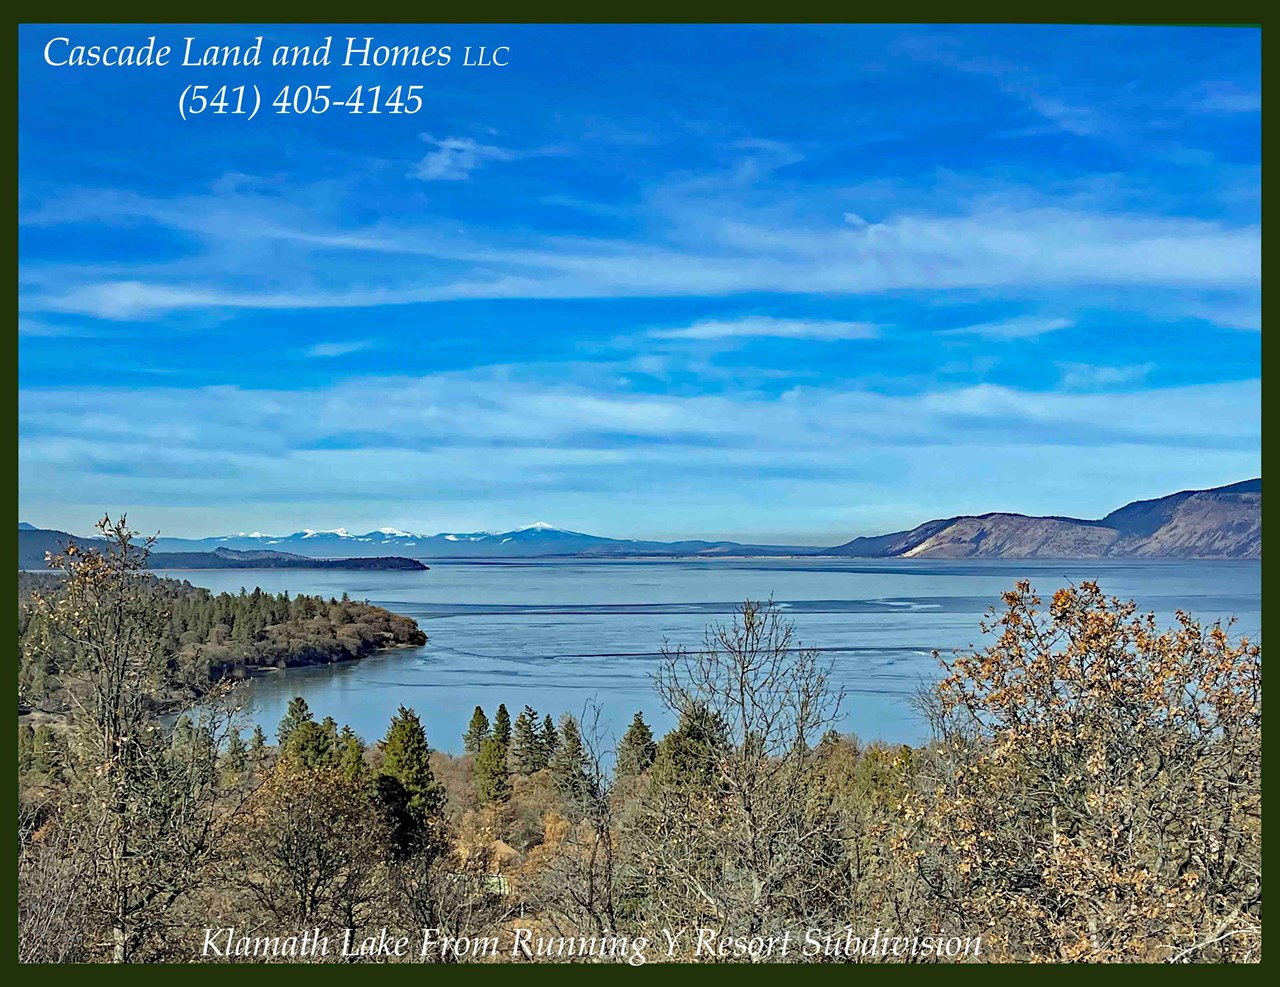 this view of klamath lake is not from the property, it is just down the road. the lake is home to an incredible number of birds, both migratory and year round, and abundant wildlife. the towering cascade mountain peaks offer an incredible backdrop for this gorgeous lake.